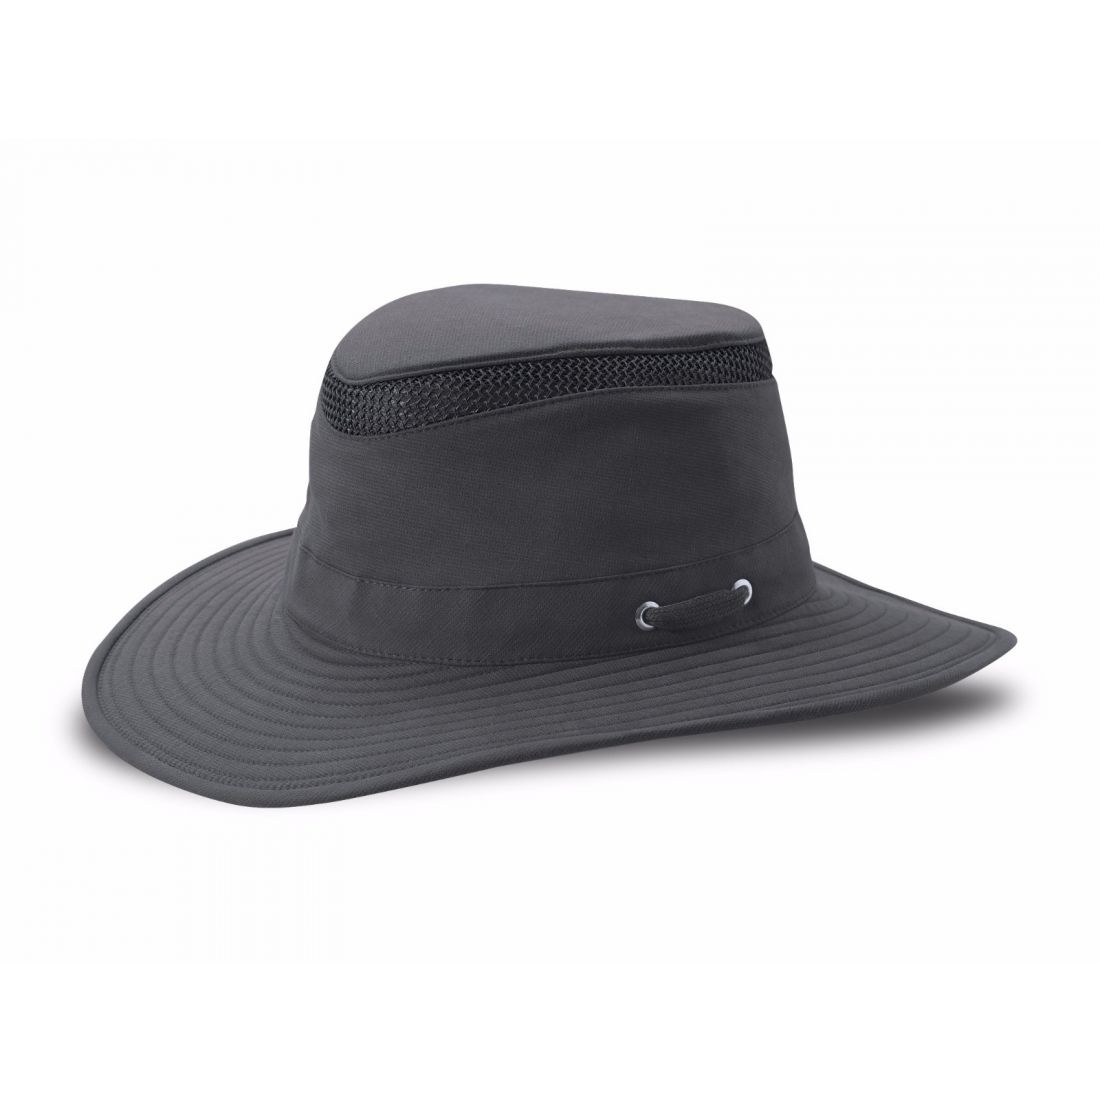 Tilley Hiker's Hat with Cooling Insert